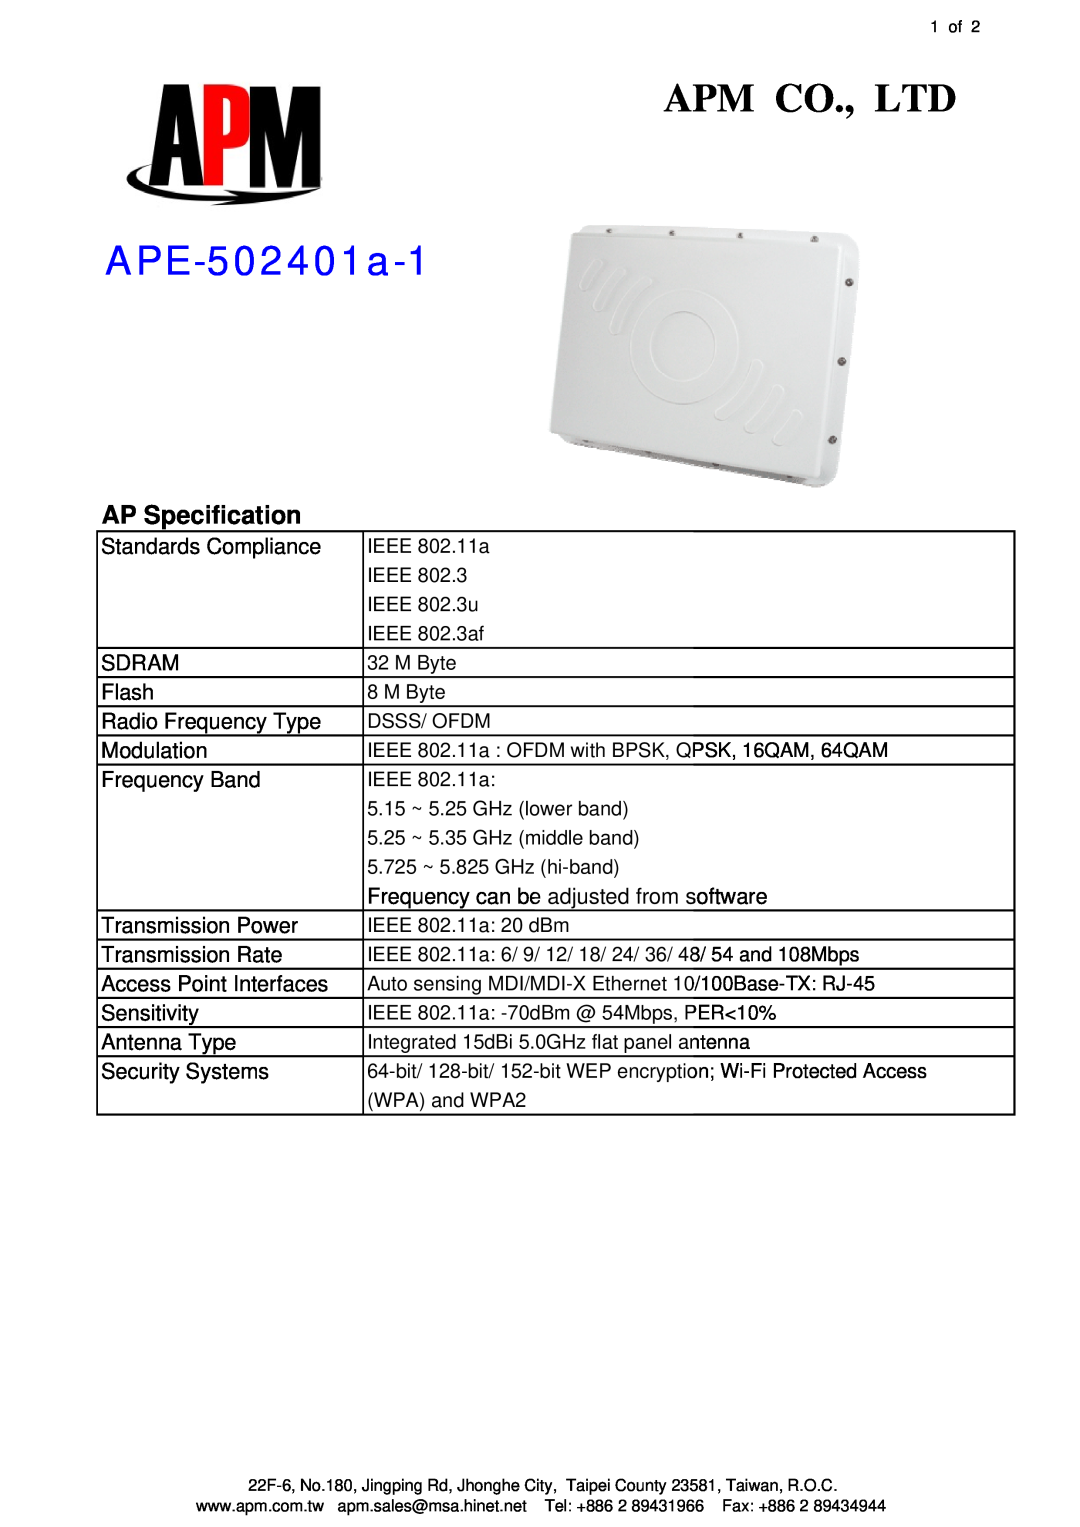 APM APE-502401a-1 specifications AP Specification 